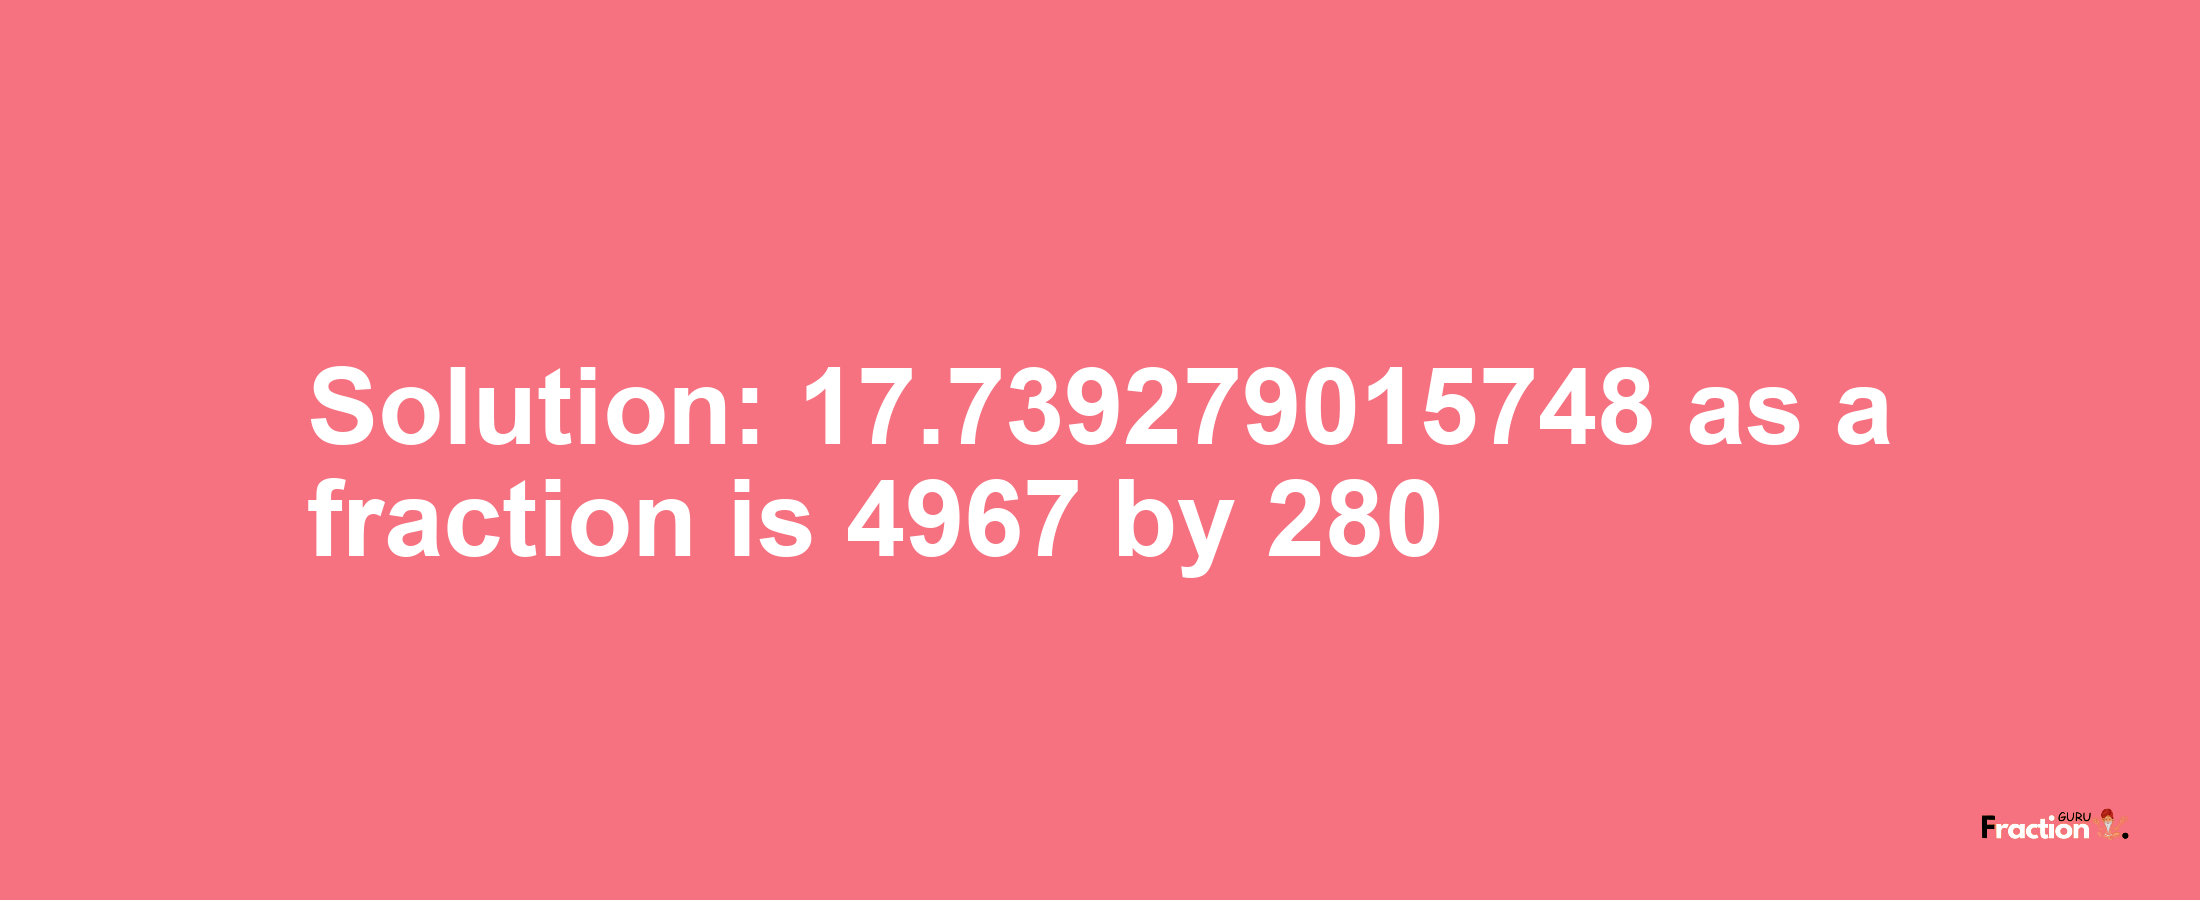 Solution:17.739279015748 as a fraction is 4967/280